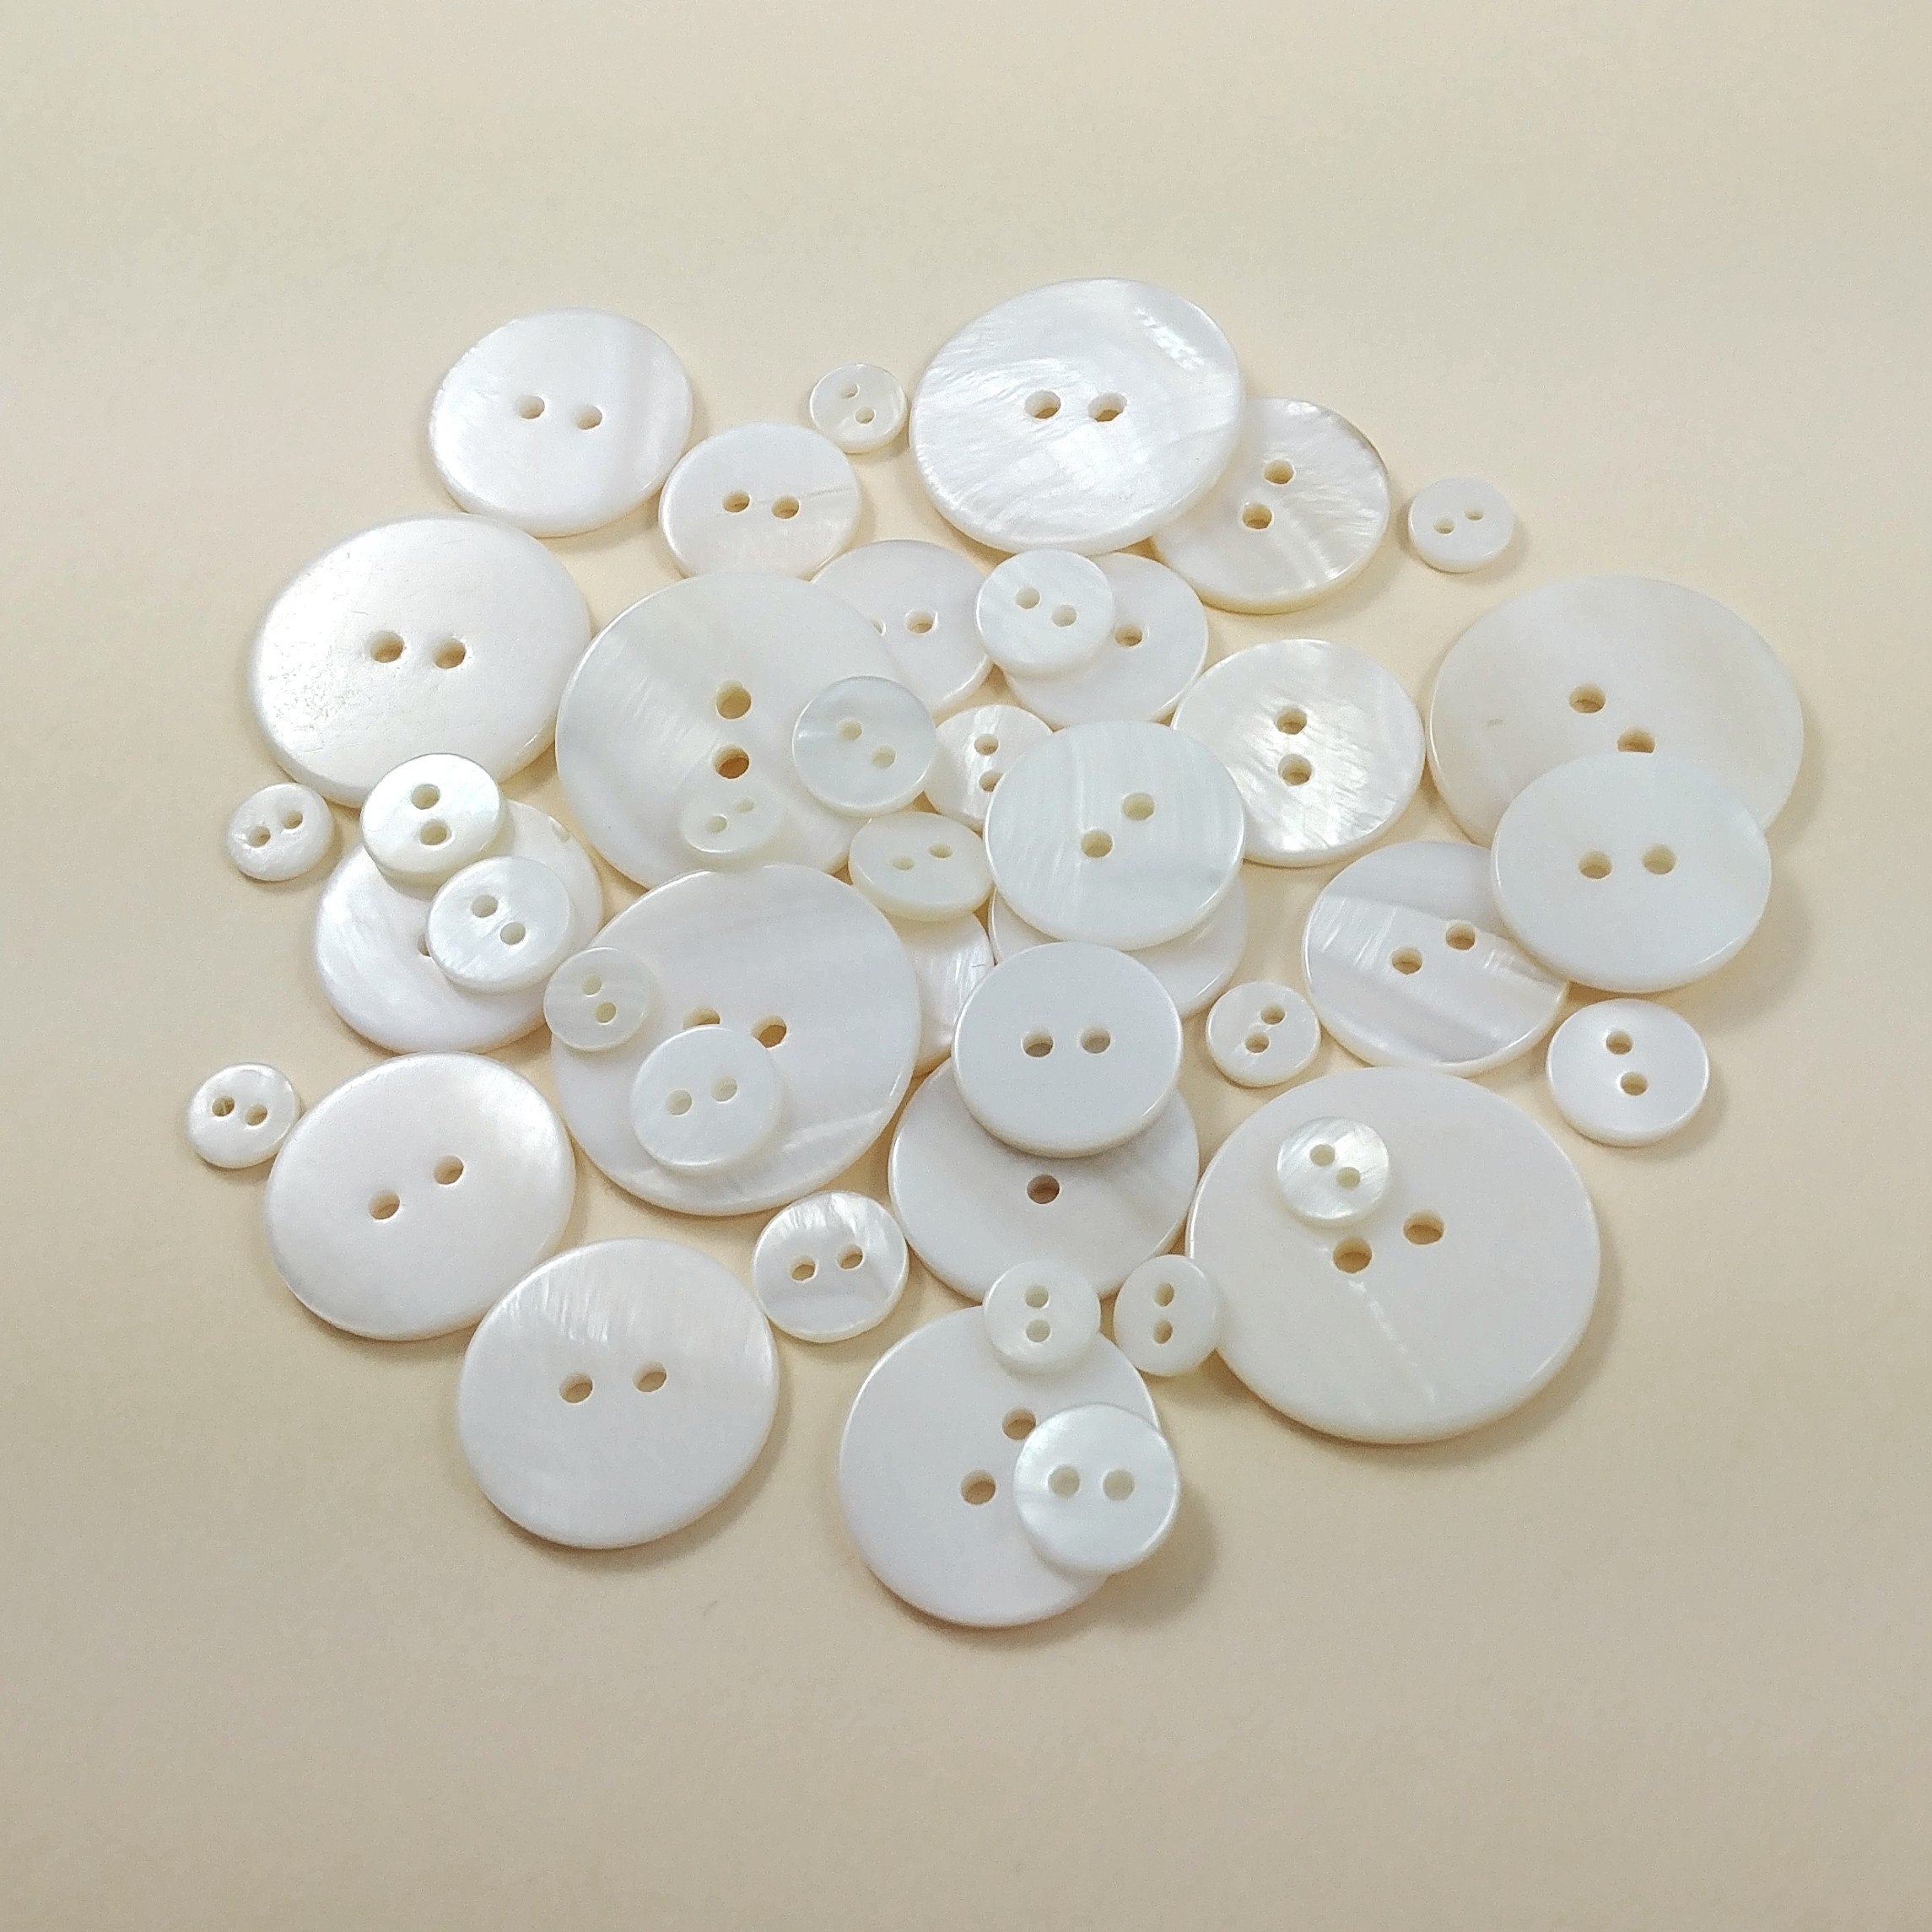 White Genuine Mother of Pearl Buttons Set,22PCS/Pack(16PCS 15mm+6pcs 20MM),2 Holes Bulk Natural Mop Pearl Shell Buttons for DIY Sewing Crafts,Shirts